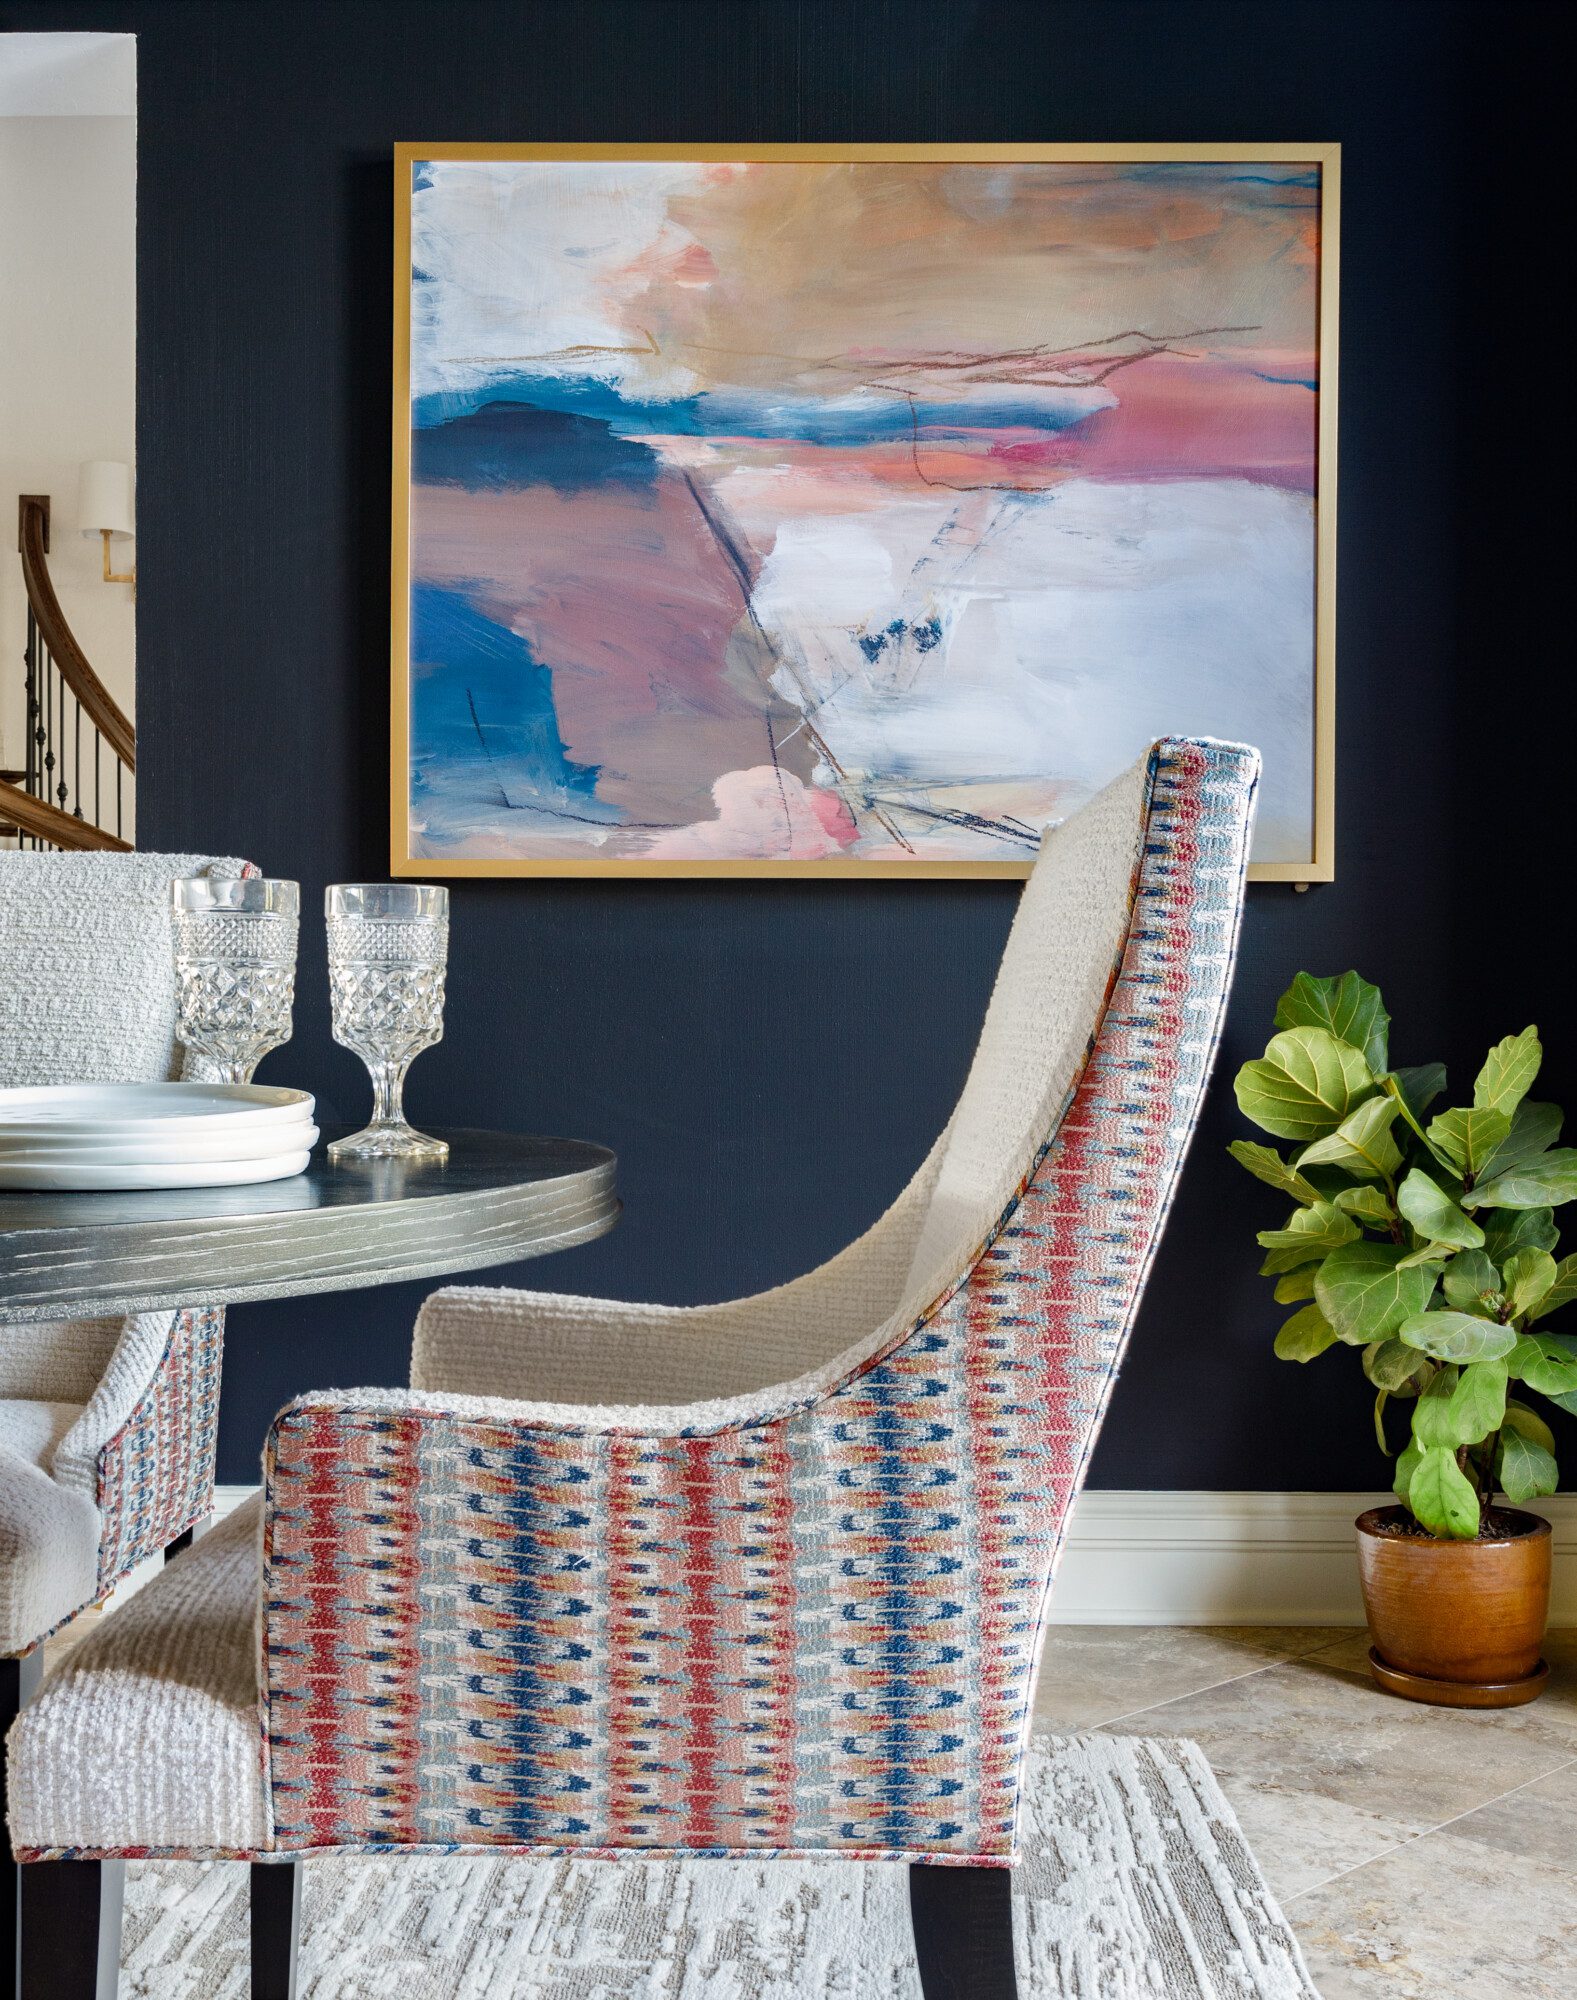 Large painting on navy blue dining room wall